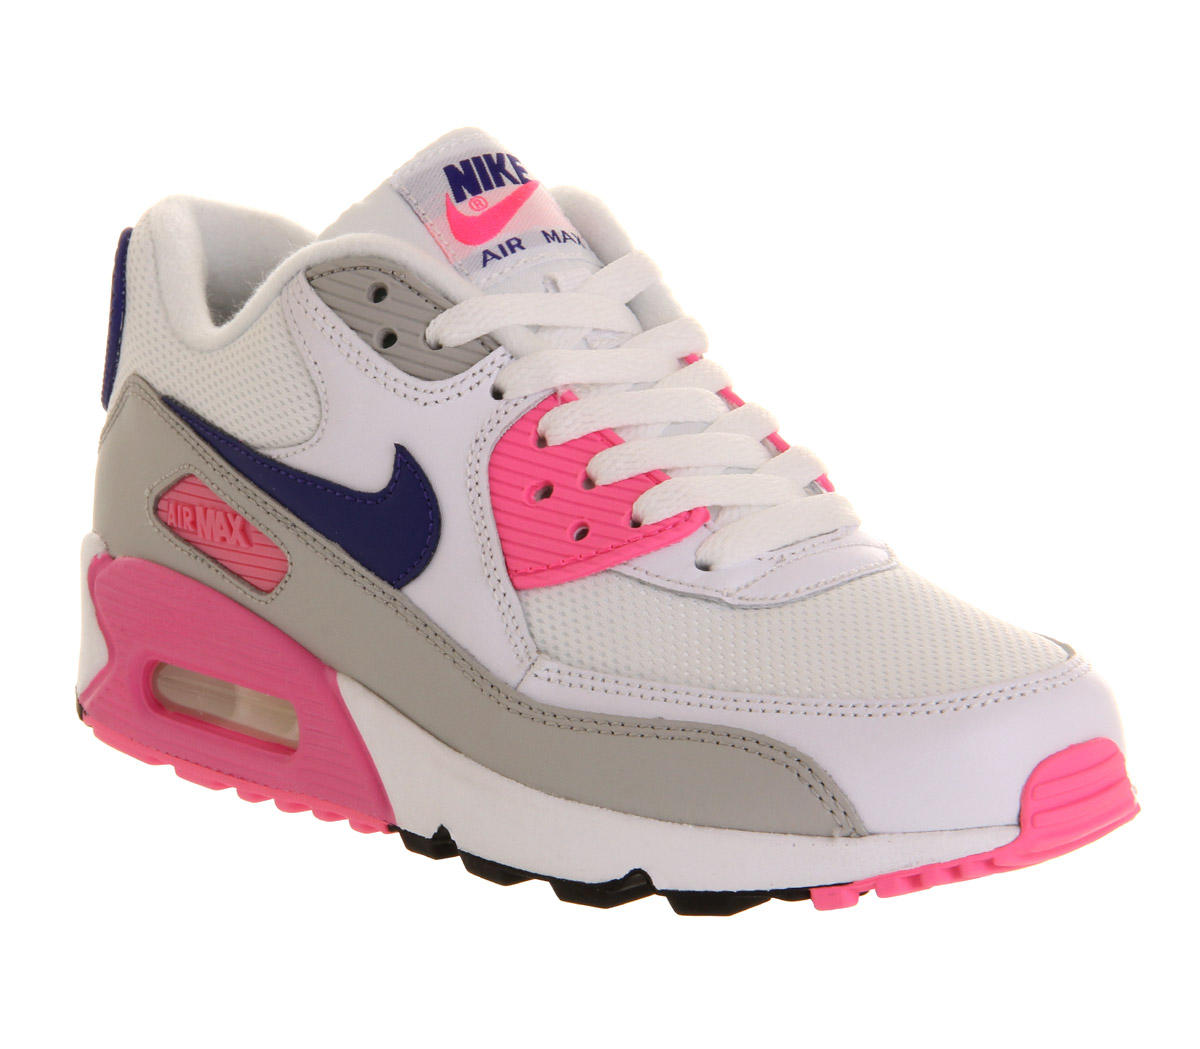 Nike Air Max 90 White Concord Grey Pink 